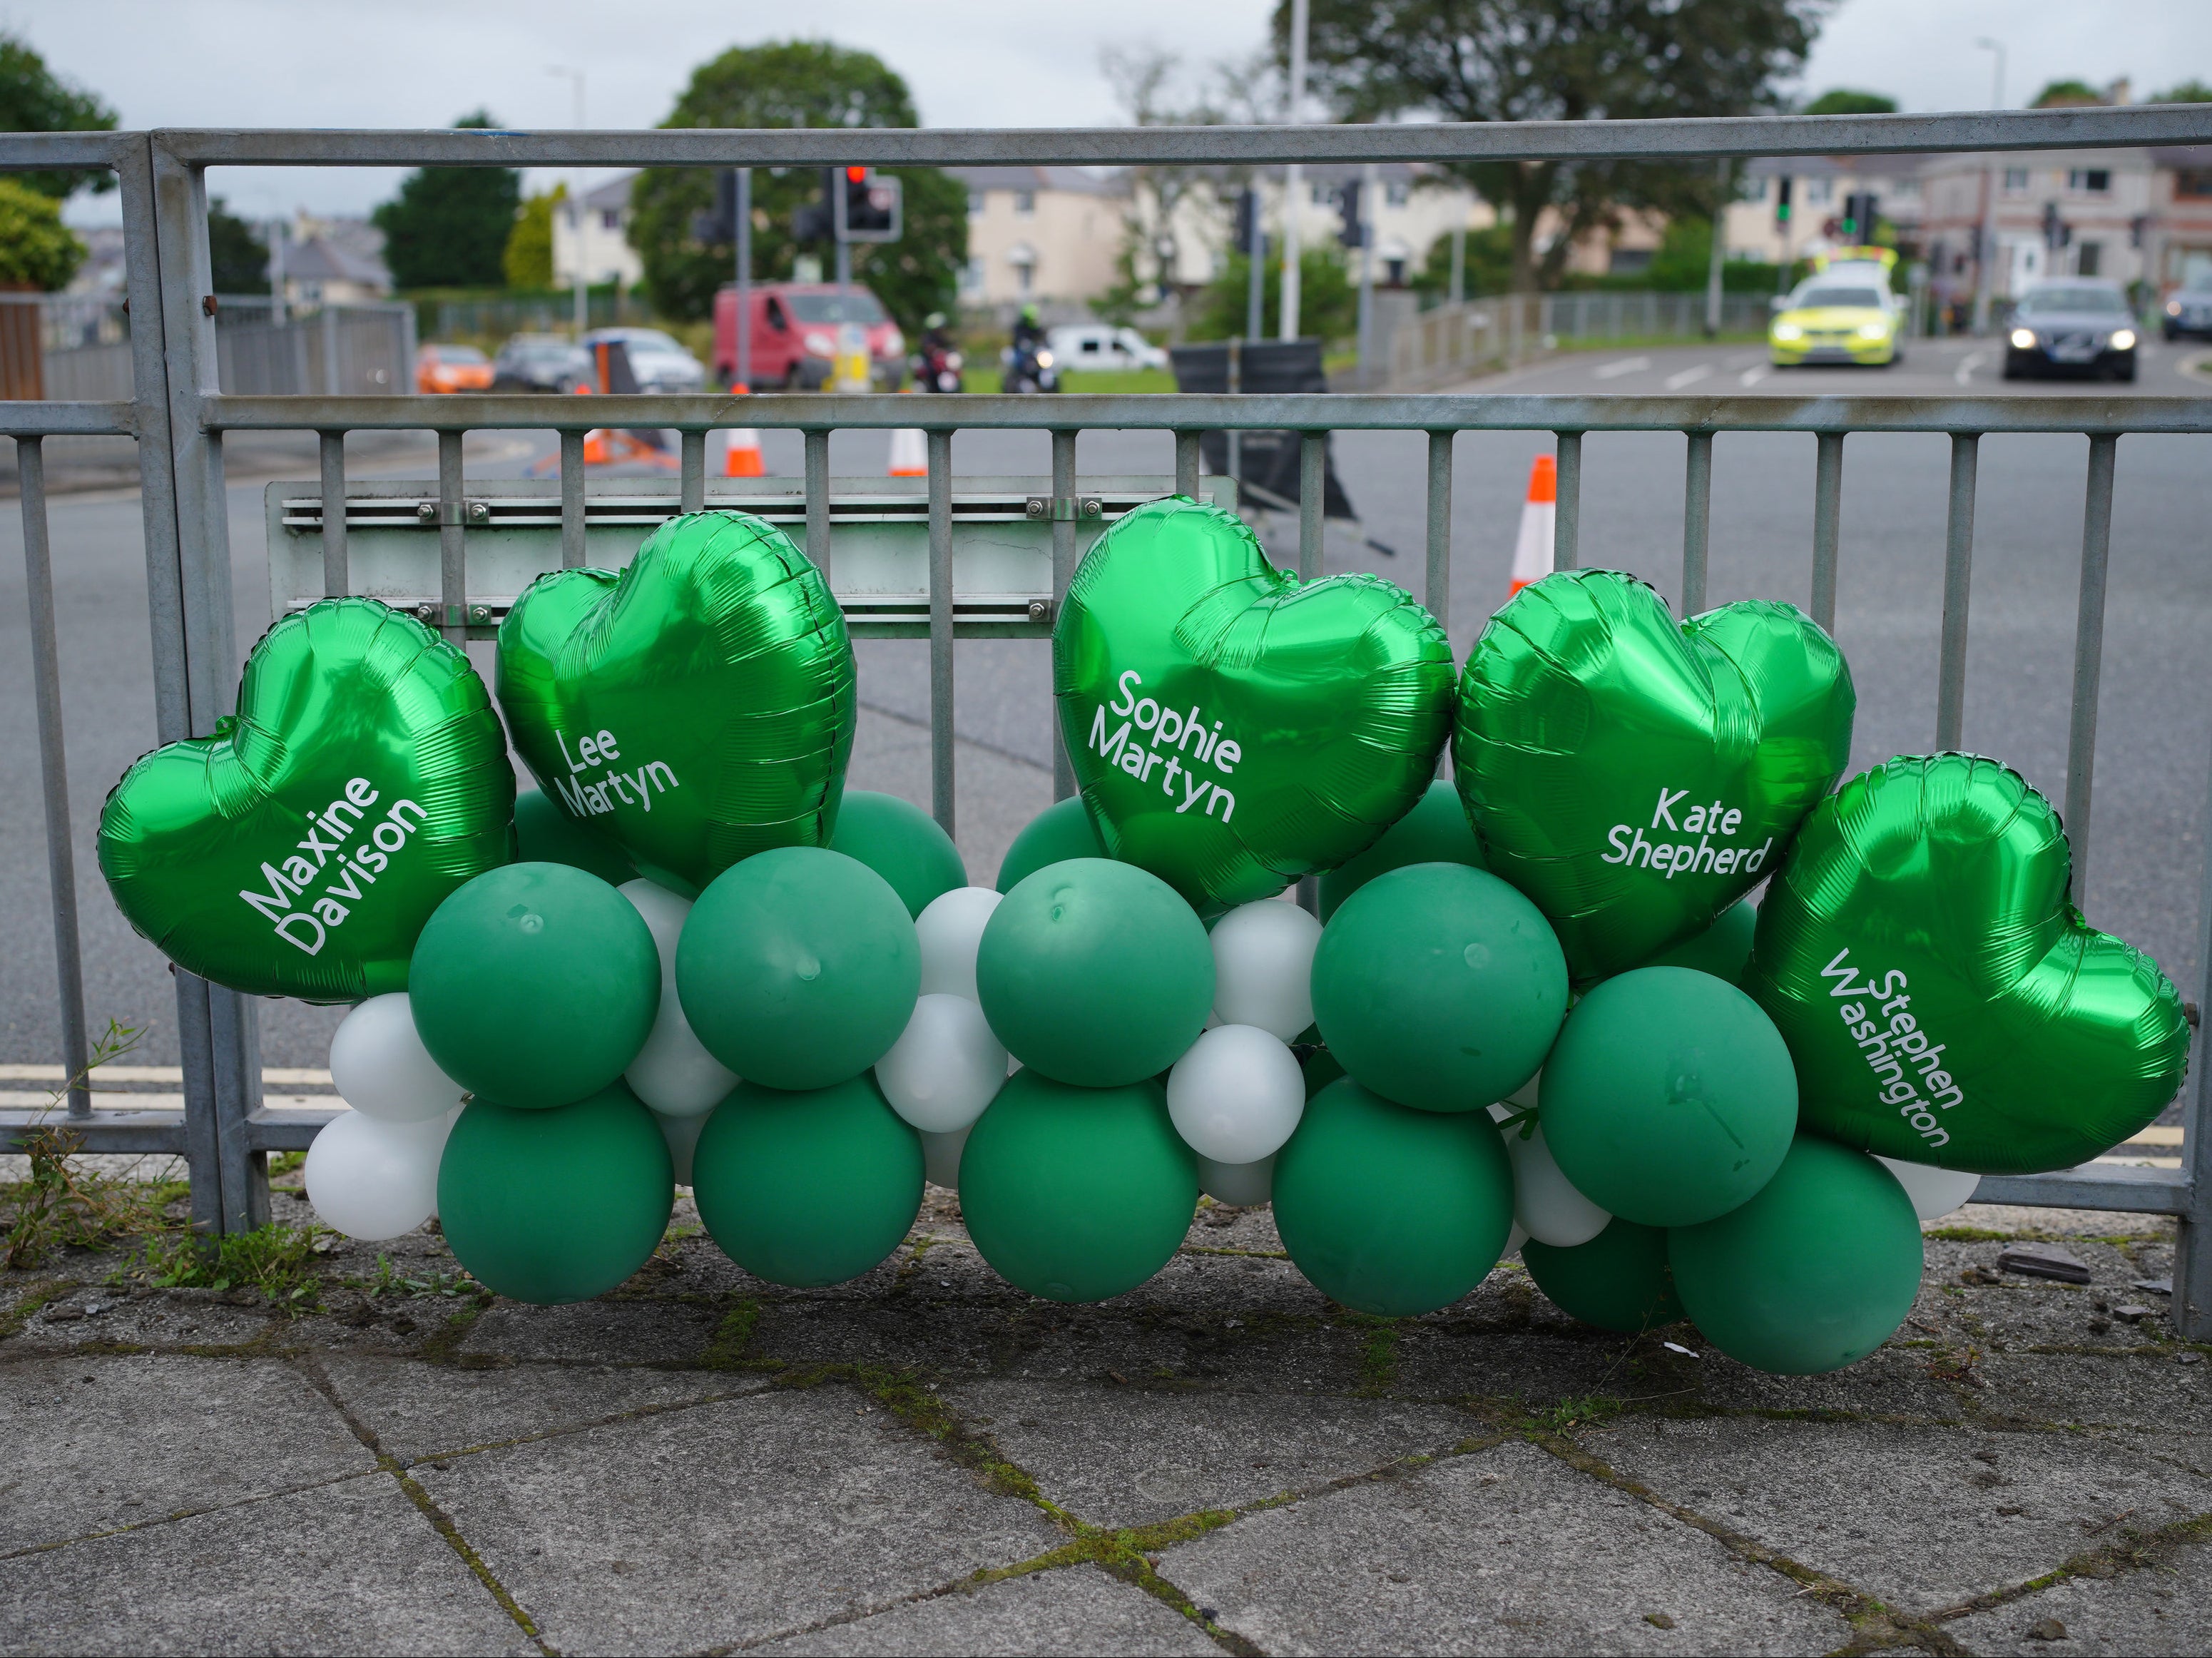 Tributes left in the Keyham area of Plymouth to victims of the attack